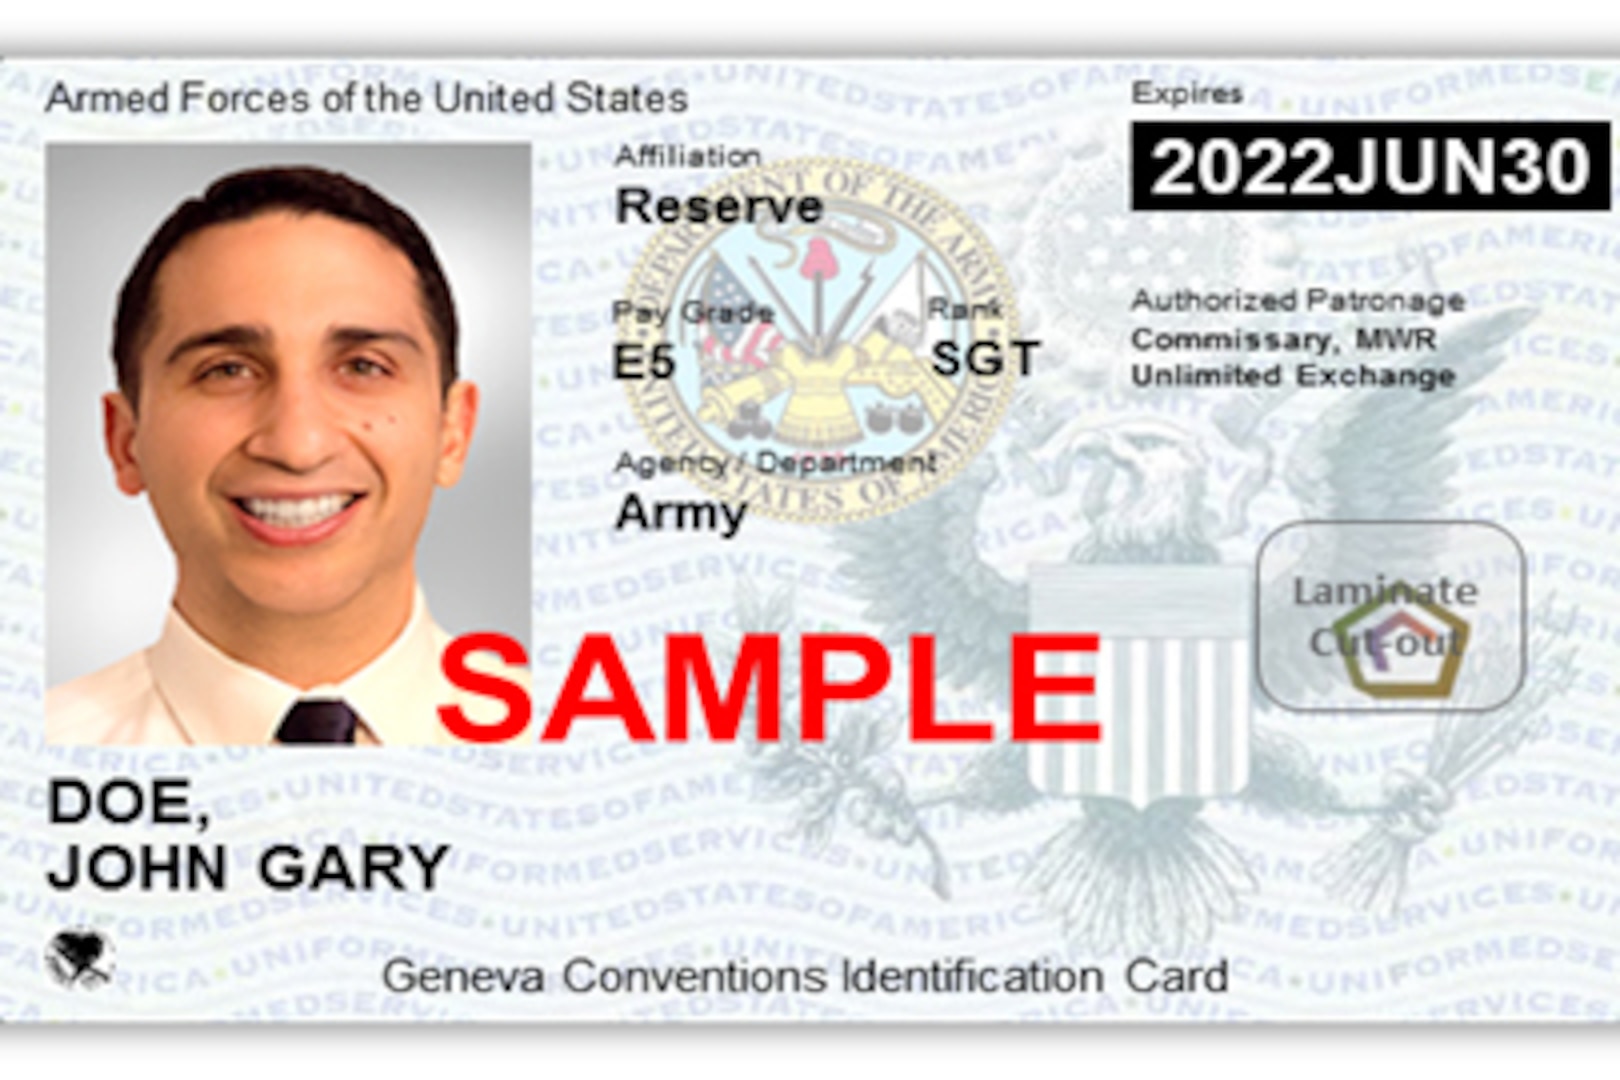 dod-time-to-renew-extended-id-cards-joint-base-san-antonio-news